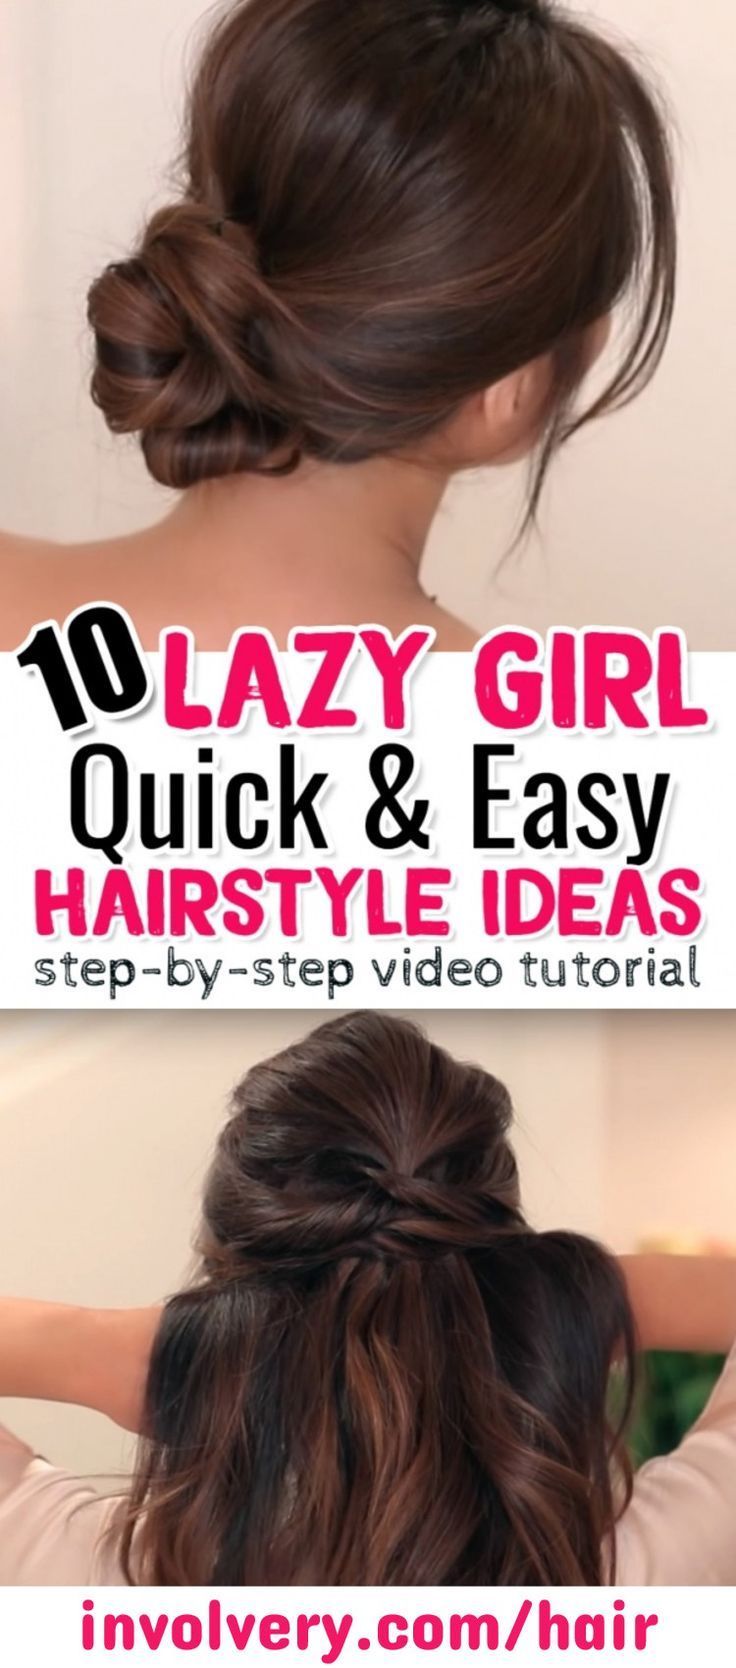 10 EASY Lazy Girl Hairstyle Ideas {Step By Step Video Tutorials For Lazy Day Running Late Quick Hairstyles} -   14 hairstyles Quick locks ideas